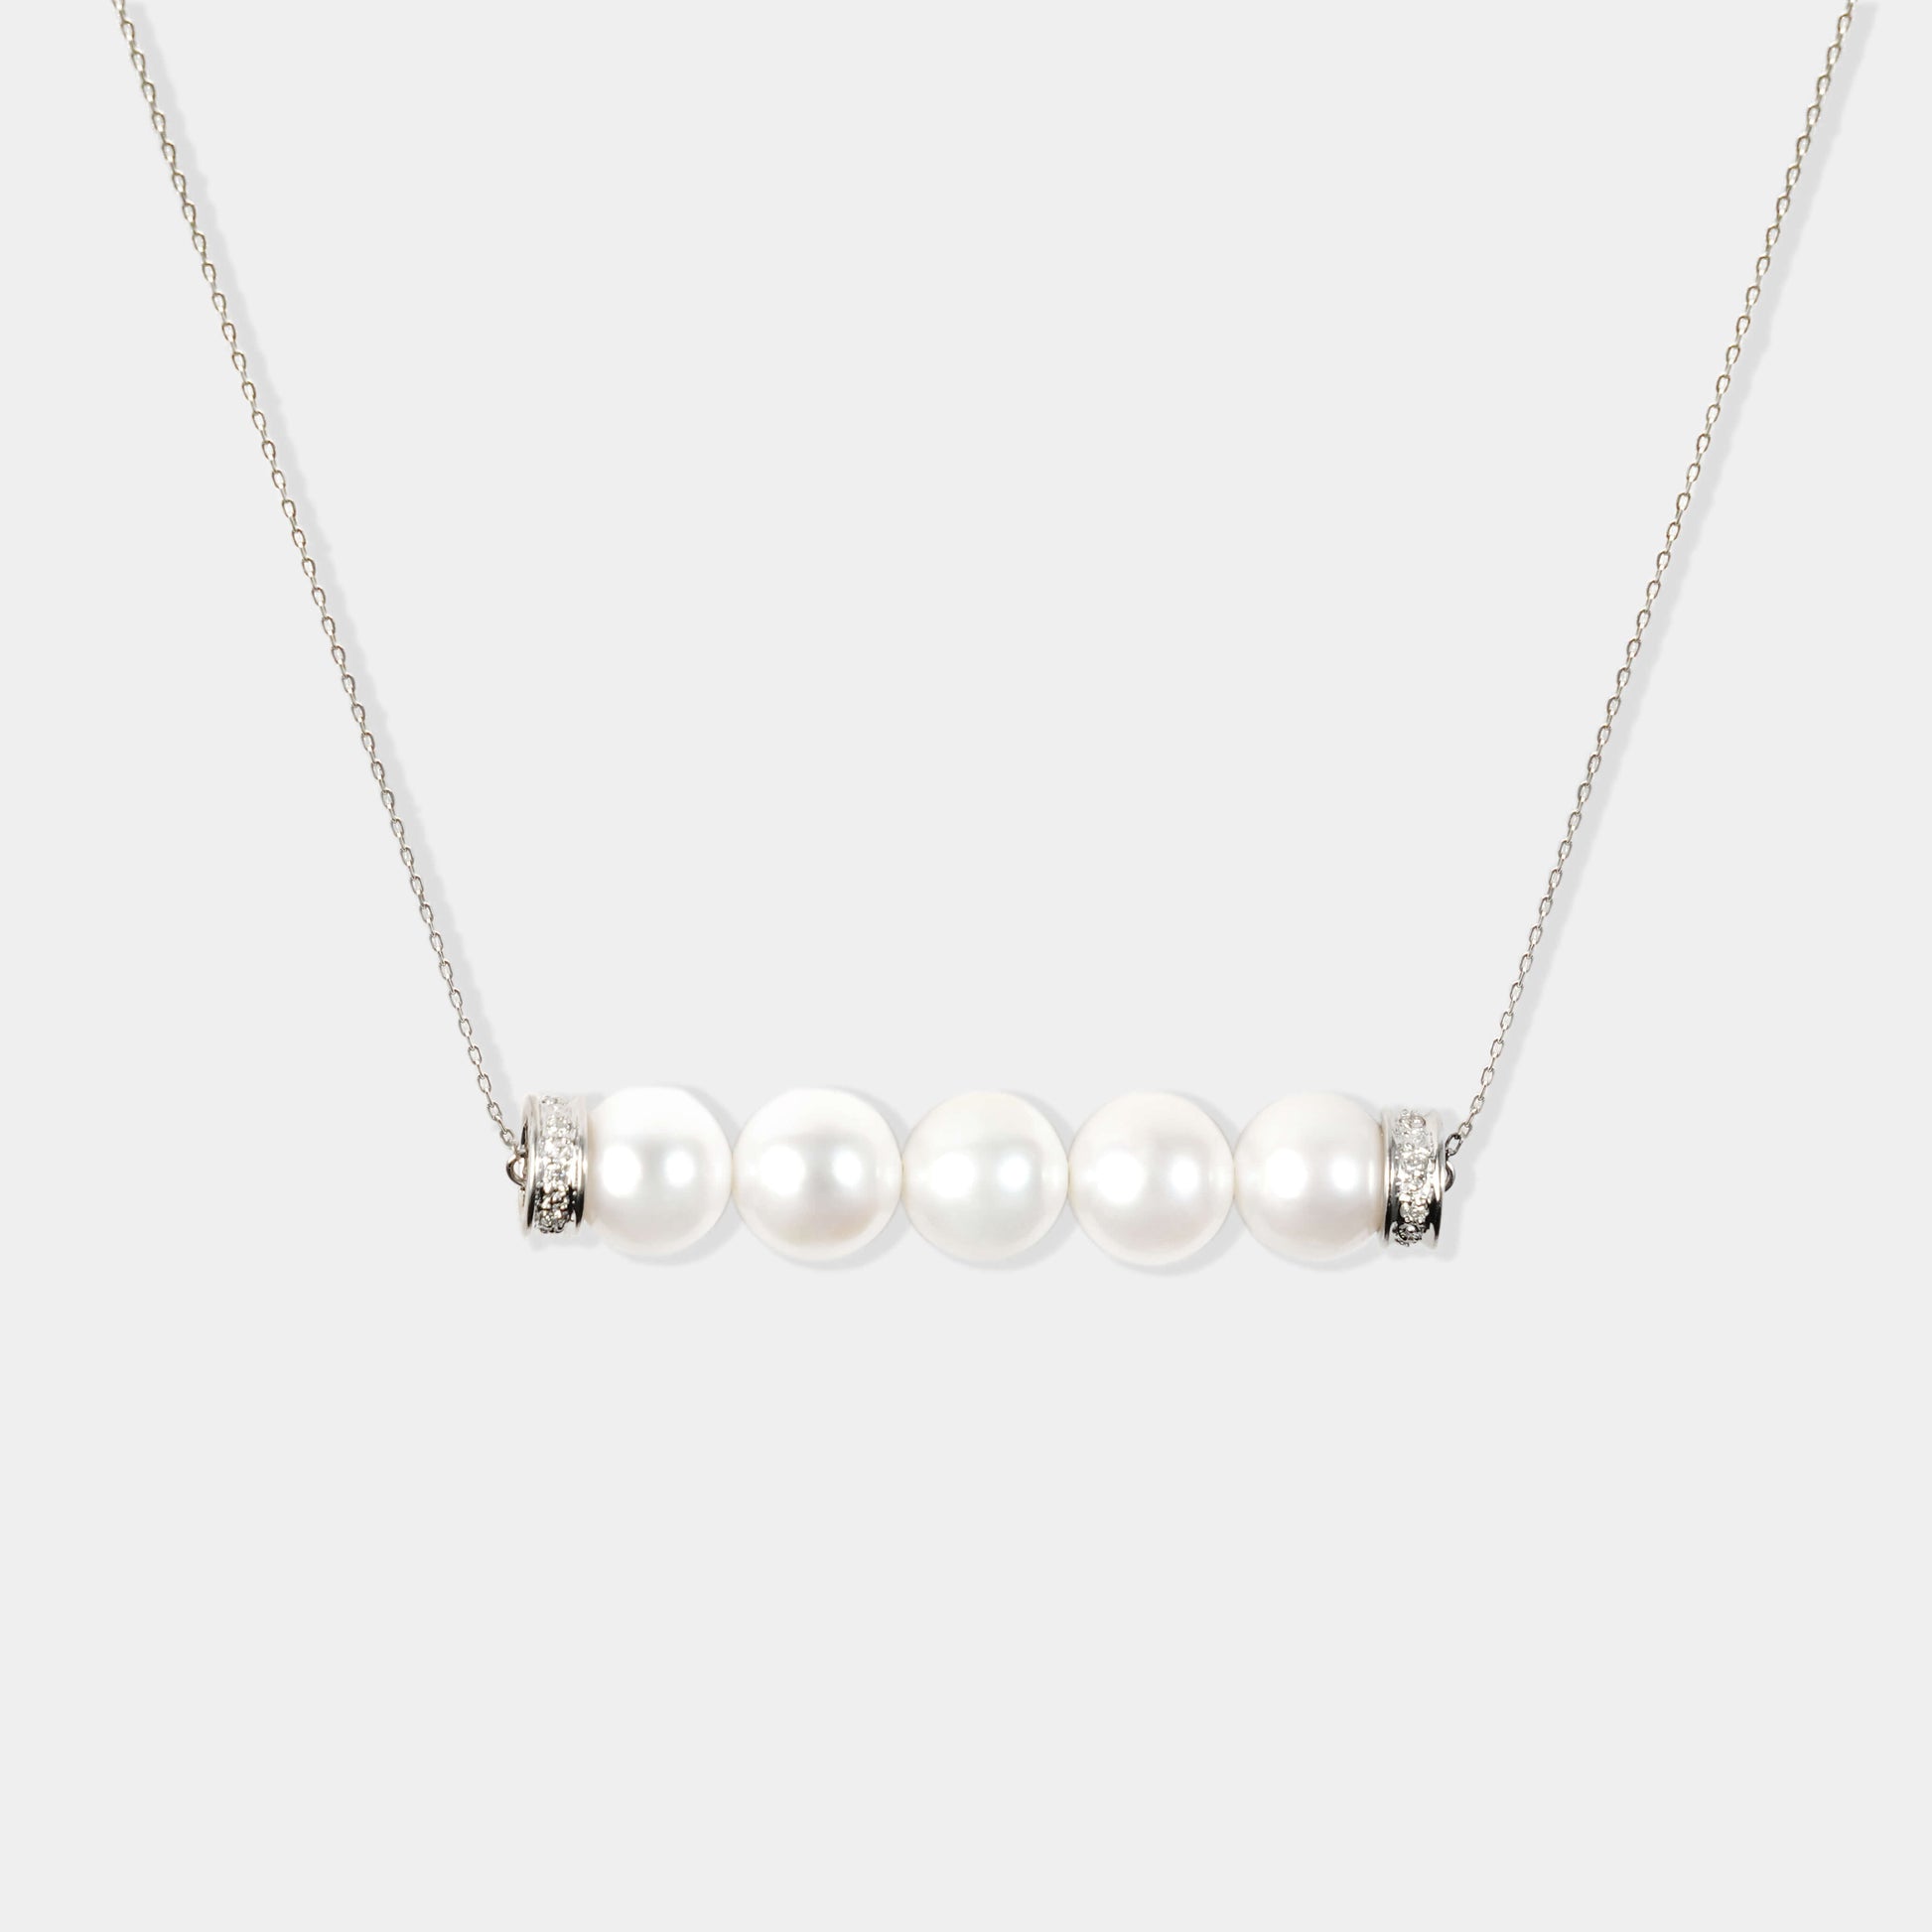 Elegant white pearl necklace with four pearls on a silver chain. Perfect for adding a touch of sophistication to any outfit.